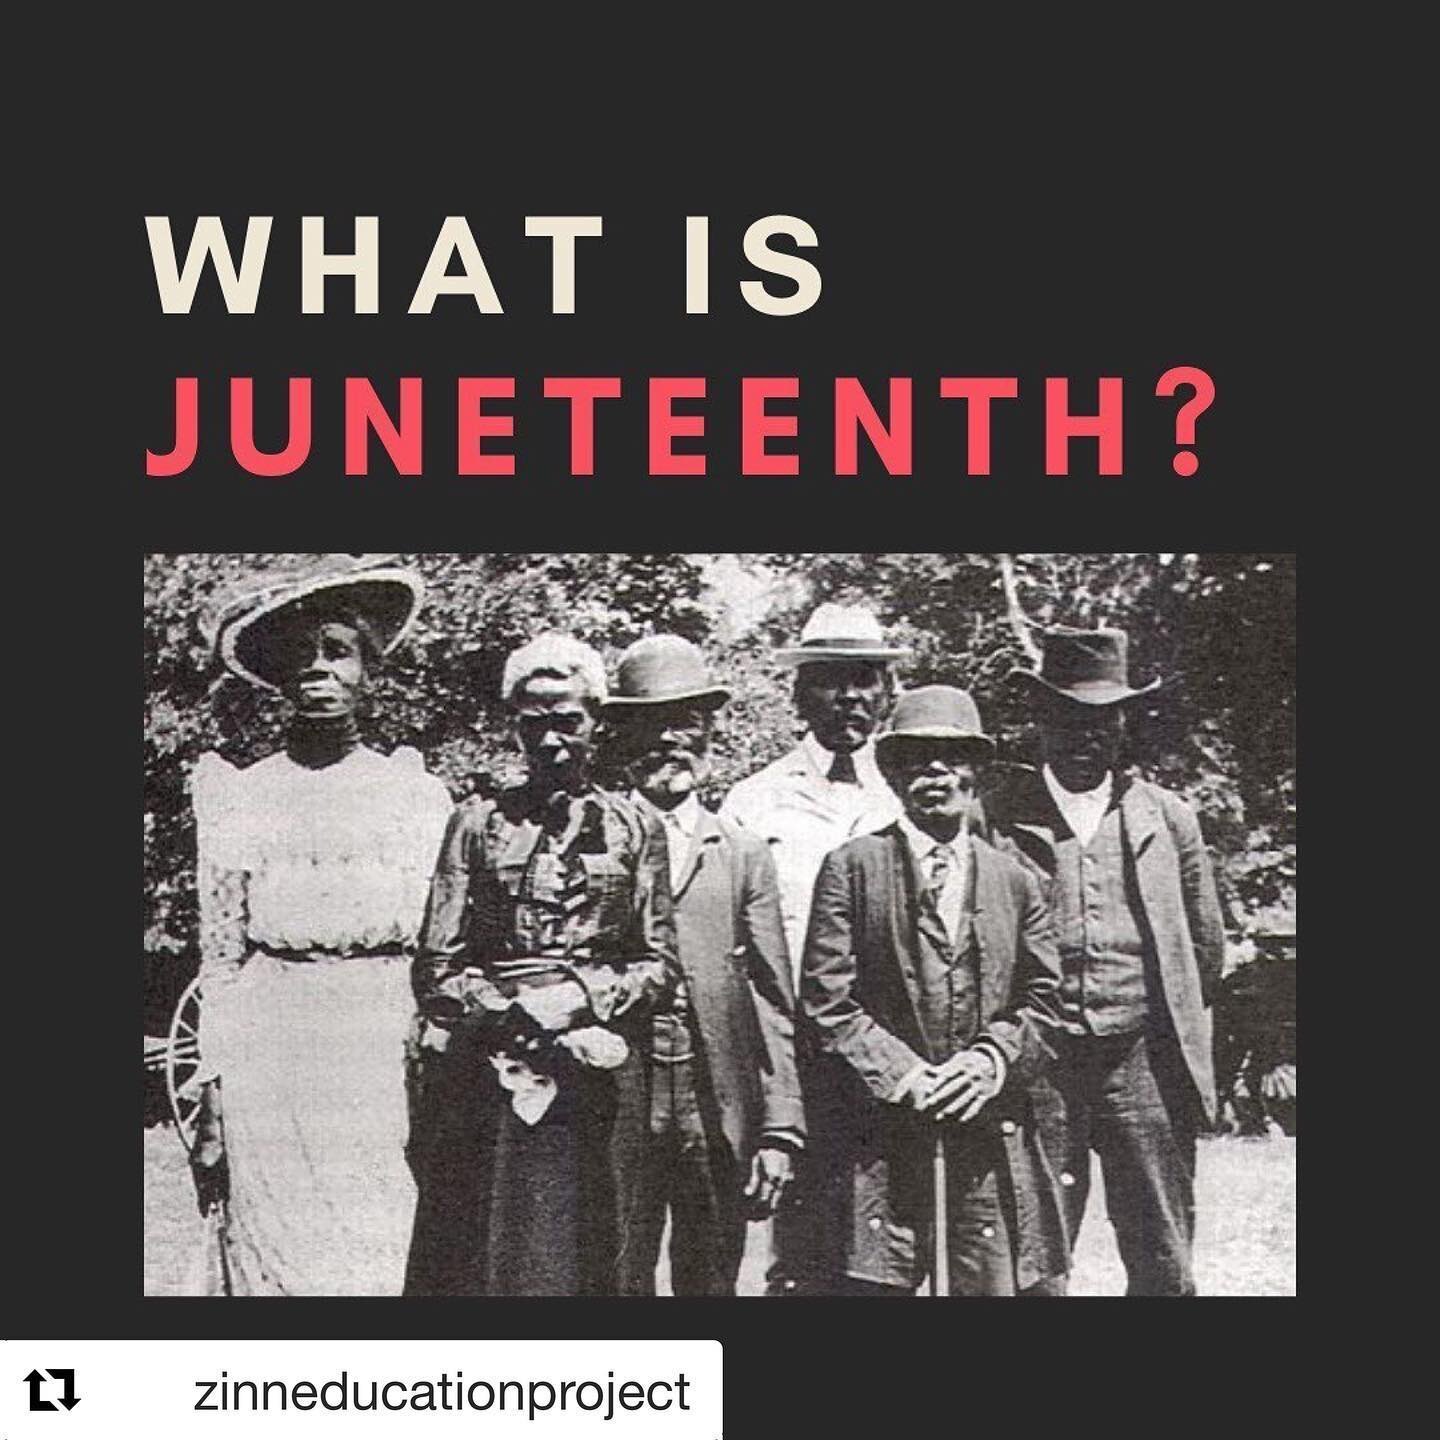 #Repost @zinneducationproject with @get_repost
・・・
June 19 &ndash; Juneteenth or Emancipation Day &ndash; is the oldest known celebration commemorating the ending of slavery in the United States. Why is this not a national holiday to celebrate freedo